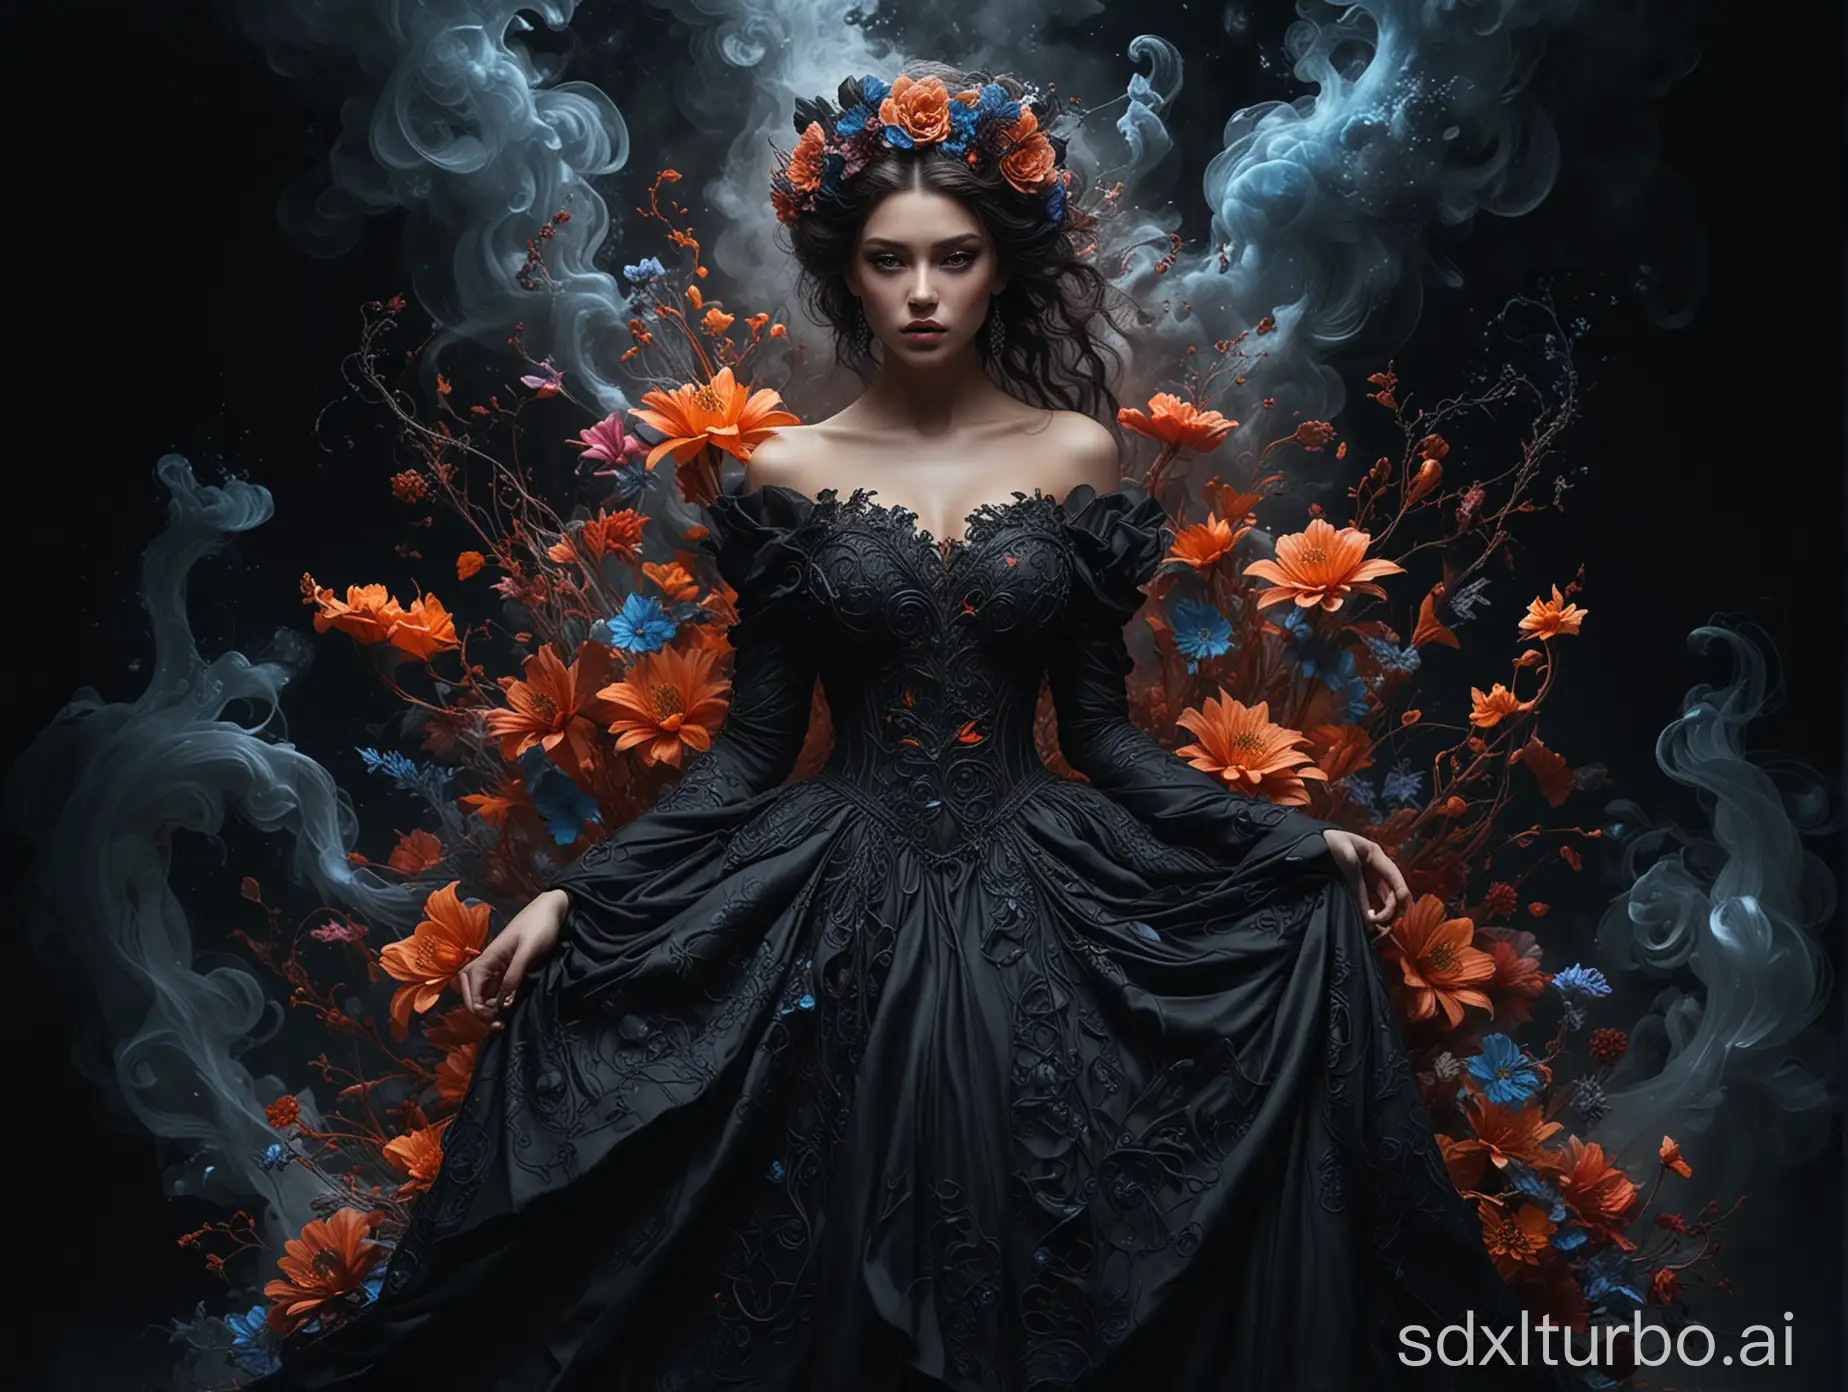 A visually stunning and surreal masterpiece that seamlessly combines photography, 3D rendering, painting, illustration, graffiti, cinematic, poster, fashion, and dark fantasy elements. The central character is an enigmatic woman, clad in a breathtakingly vibrant, ethereal gown featuring intricate floral patterns. She stands confidently against a swirling, dark backdrop, with tendrils of smoke and darkness entwining around her mesmerizing form. Her intense, smoky eyes seem to gaze deeply into the viewer's soul. The harmonious blend of vivid colors, striking contrasts, and intricate details creates a captivating visual narrative that transports the viewer into an otherworldly realm., vibrant, dark fantasy, poster, illustration, fashion, photo, painting, cinematic, 3d render, graffiti